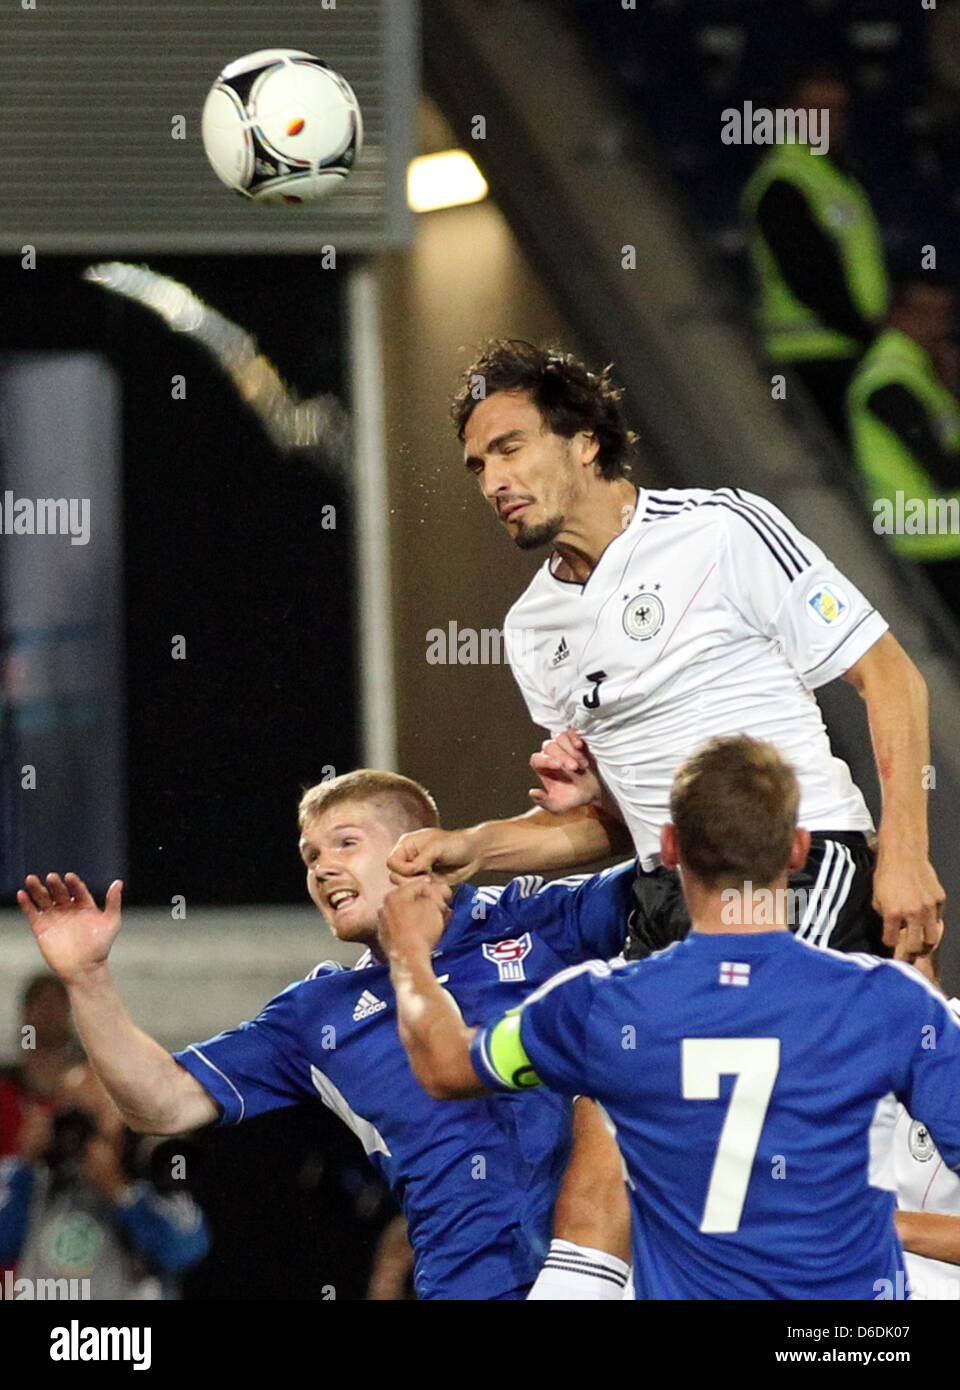 Germany's Mats Hummels (L) and Froedi Benjaminsen (R) of Faroe Islands vie for the ball during the Group C World Cup 2014 qualifying match between Germany and Faroe Islands at AWD Arena in Hanover, Germany, 07 September 2012. Photo: Friso Gentsch dpa/lni  +++(c) dpa - Bildfunk+++ Stock Photo